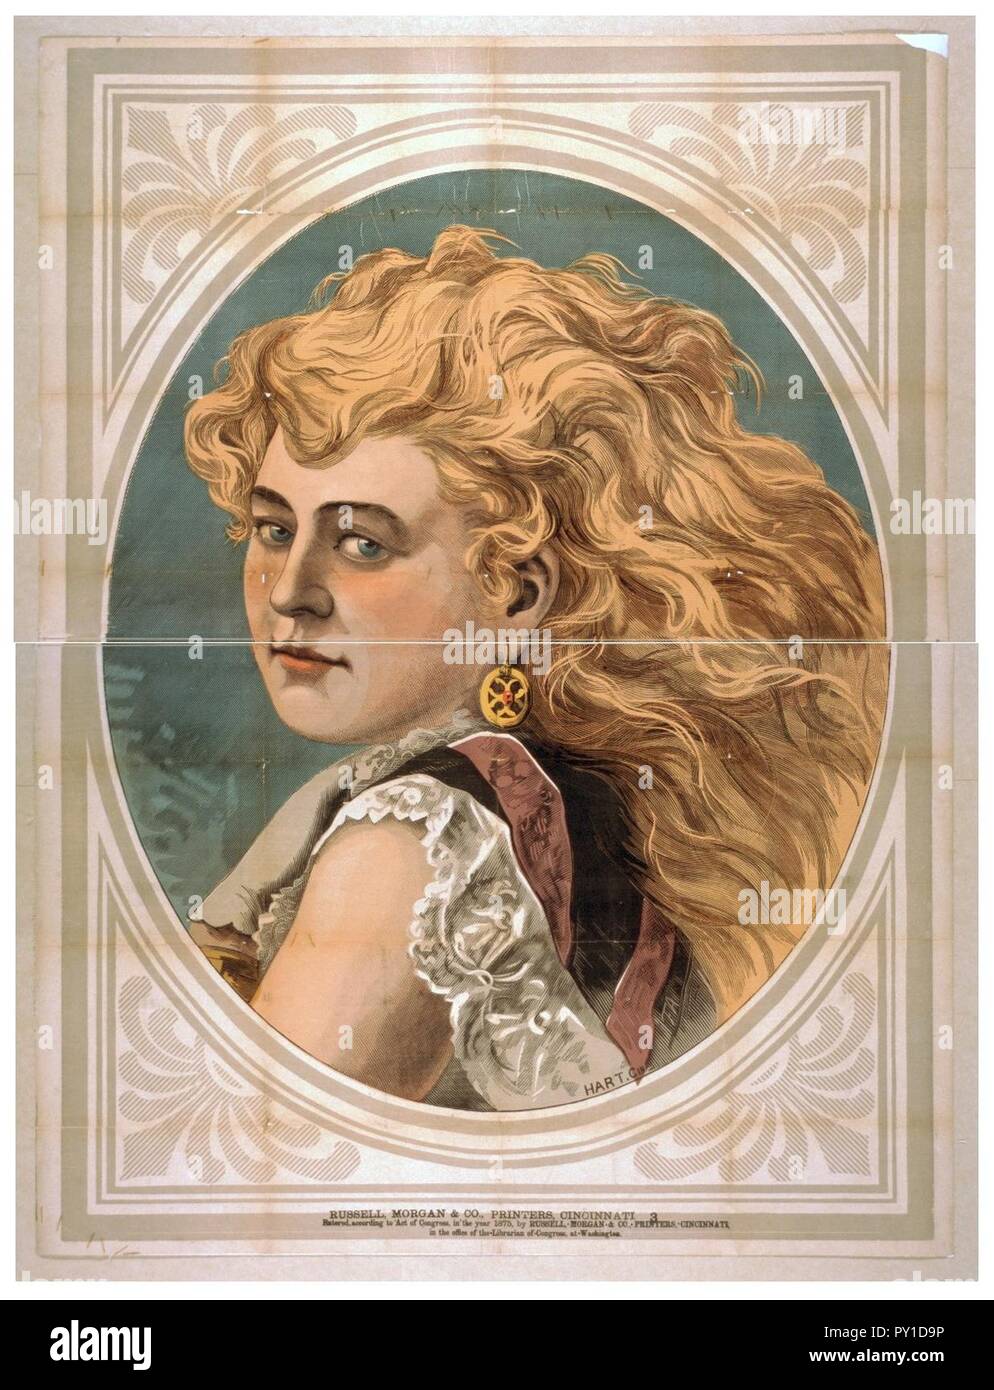 Bust view of woman with long, blond, free-flowing hair, wearing lace Stock Photo